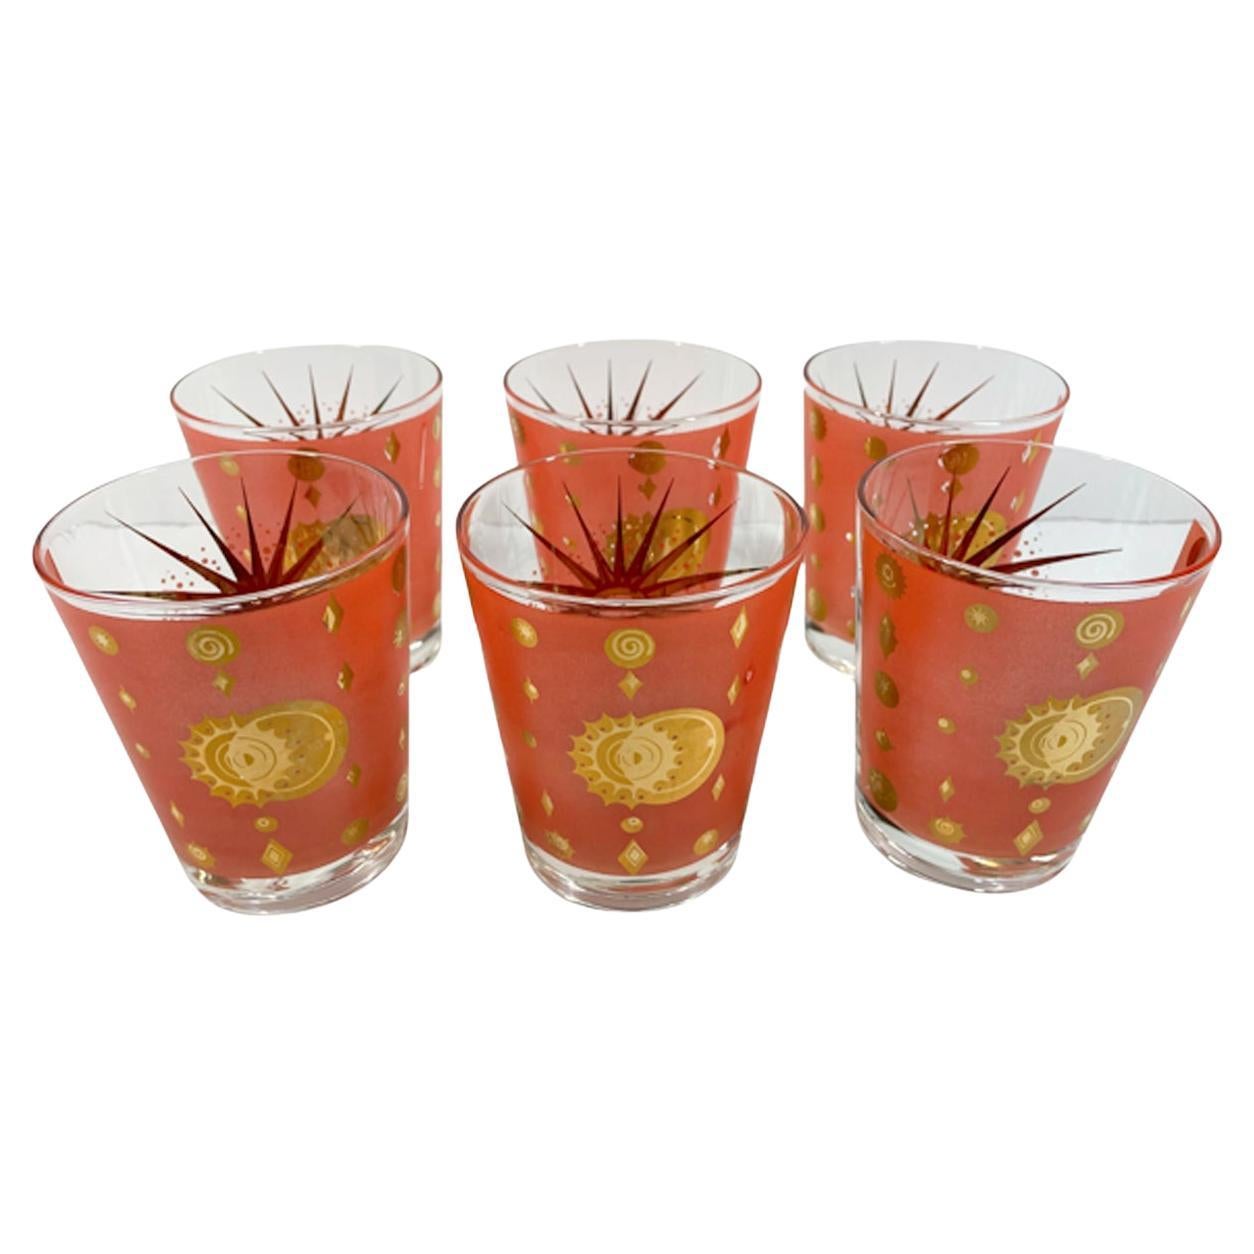 Six Fred Press "Atomic Eclipse" Double Old Fashioned Glasses in Coral & 22k Gold